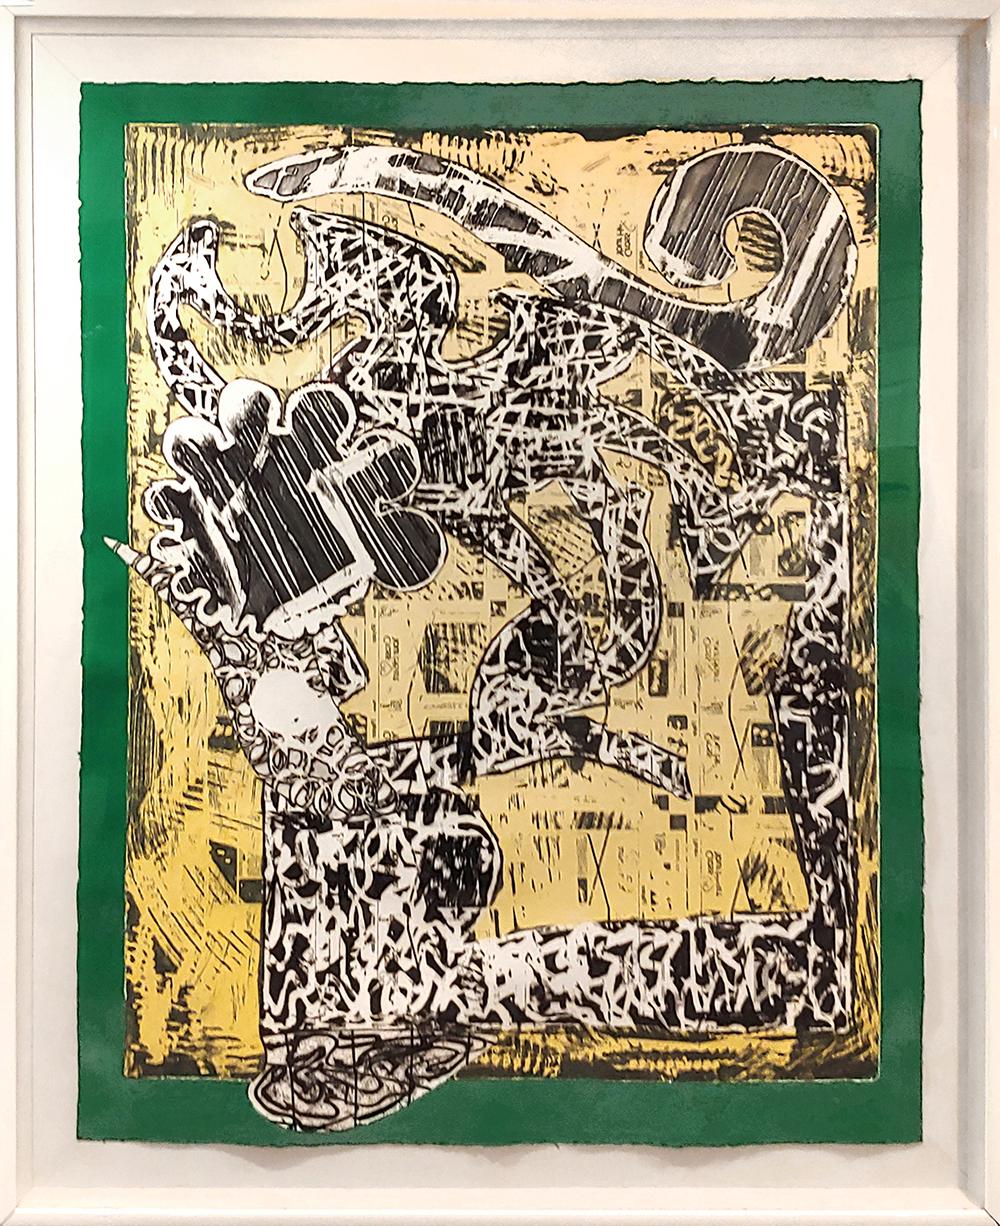 Frank Stella Abstract Print - "Green Journal" 76x62x3 etching, screenprint, and Relief Edition of only 25